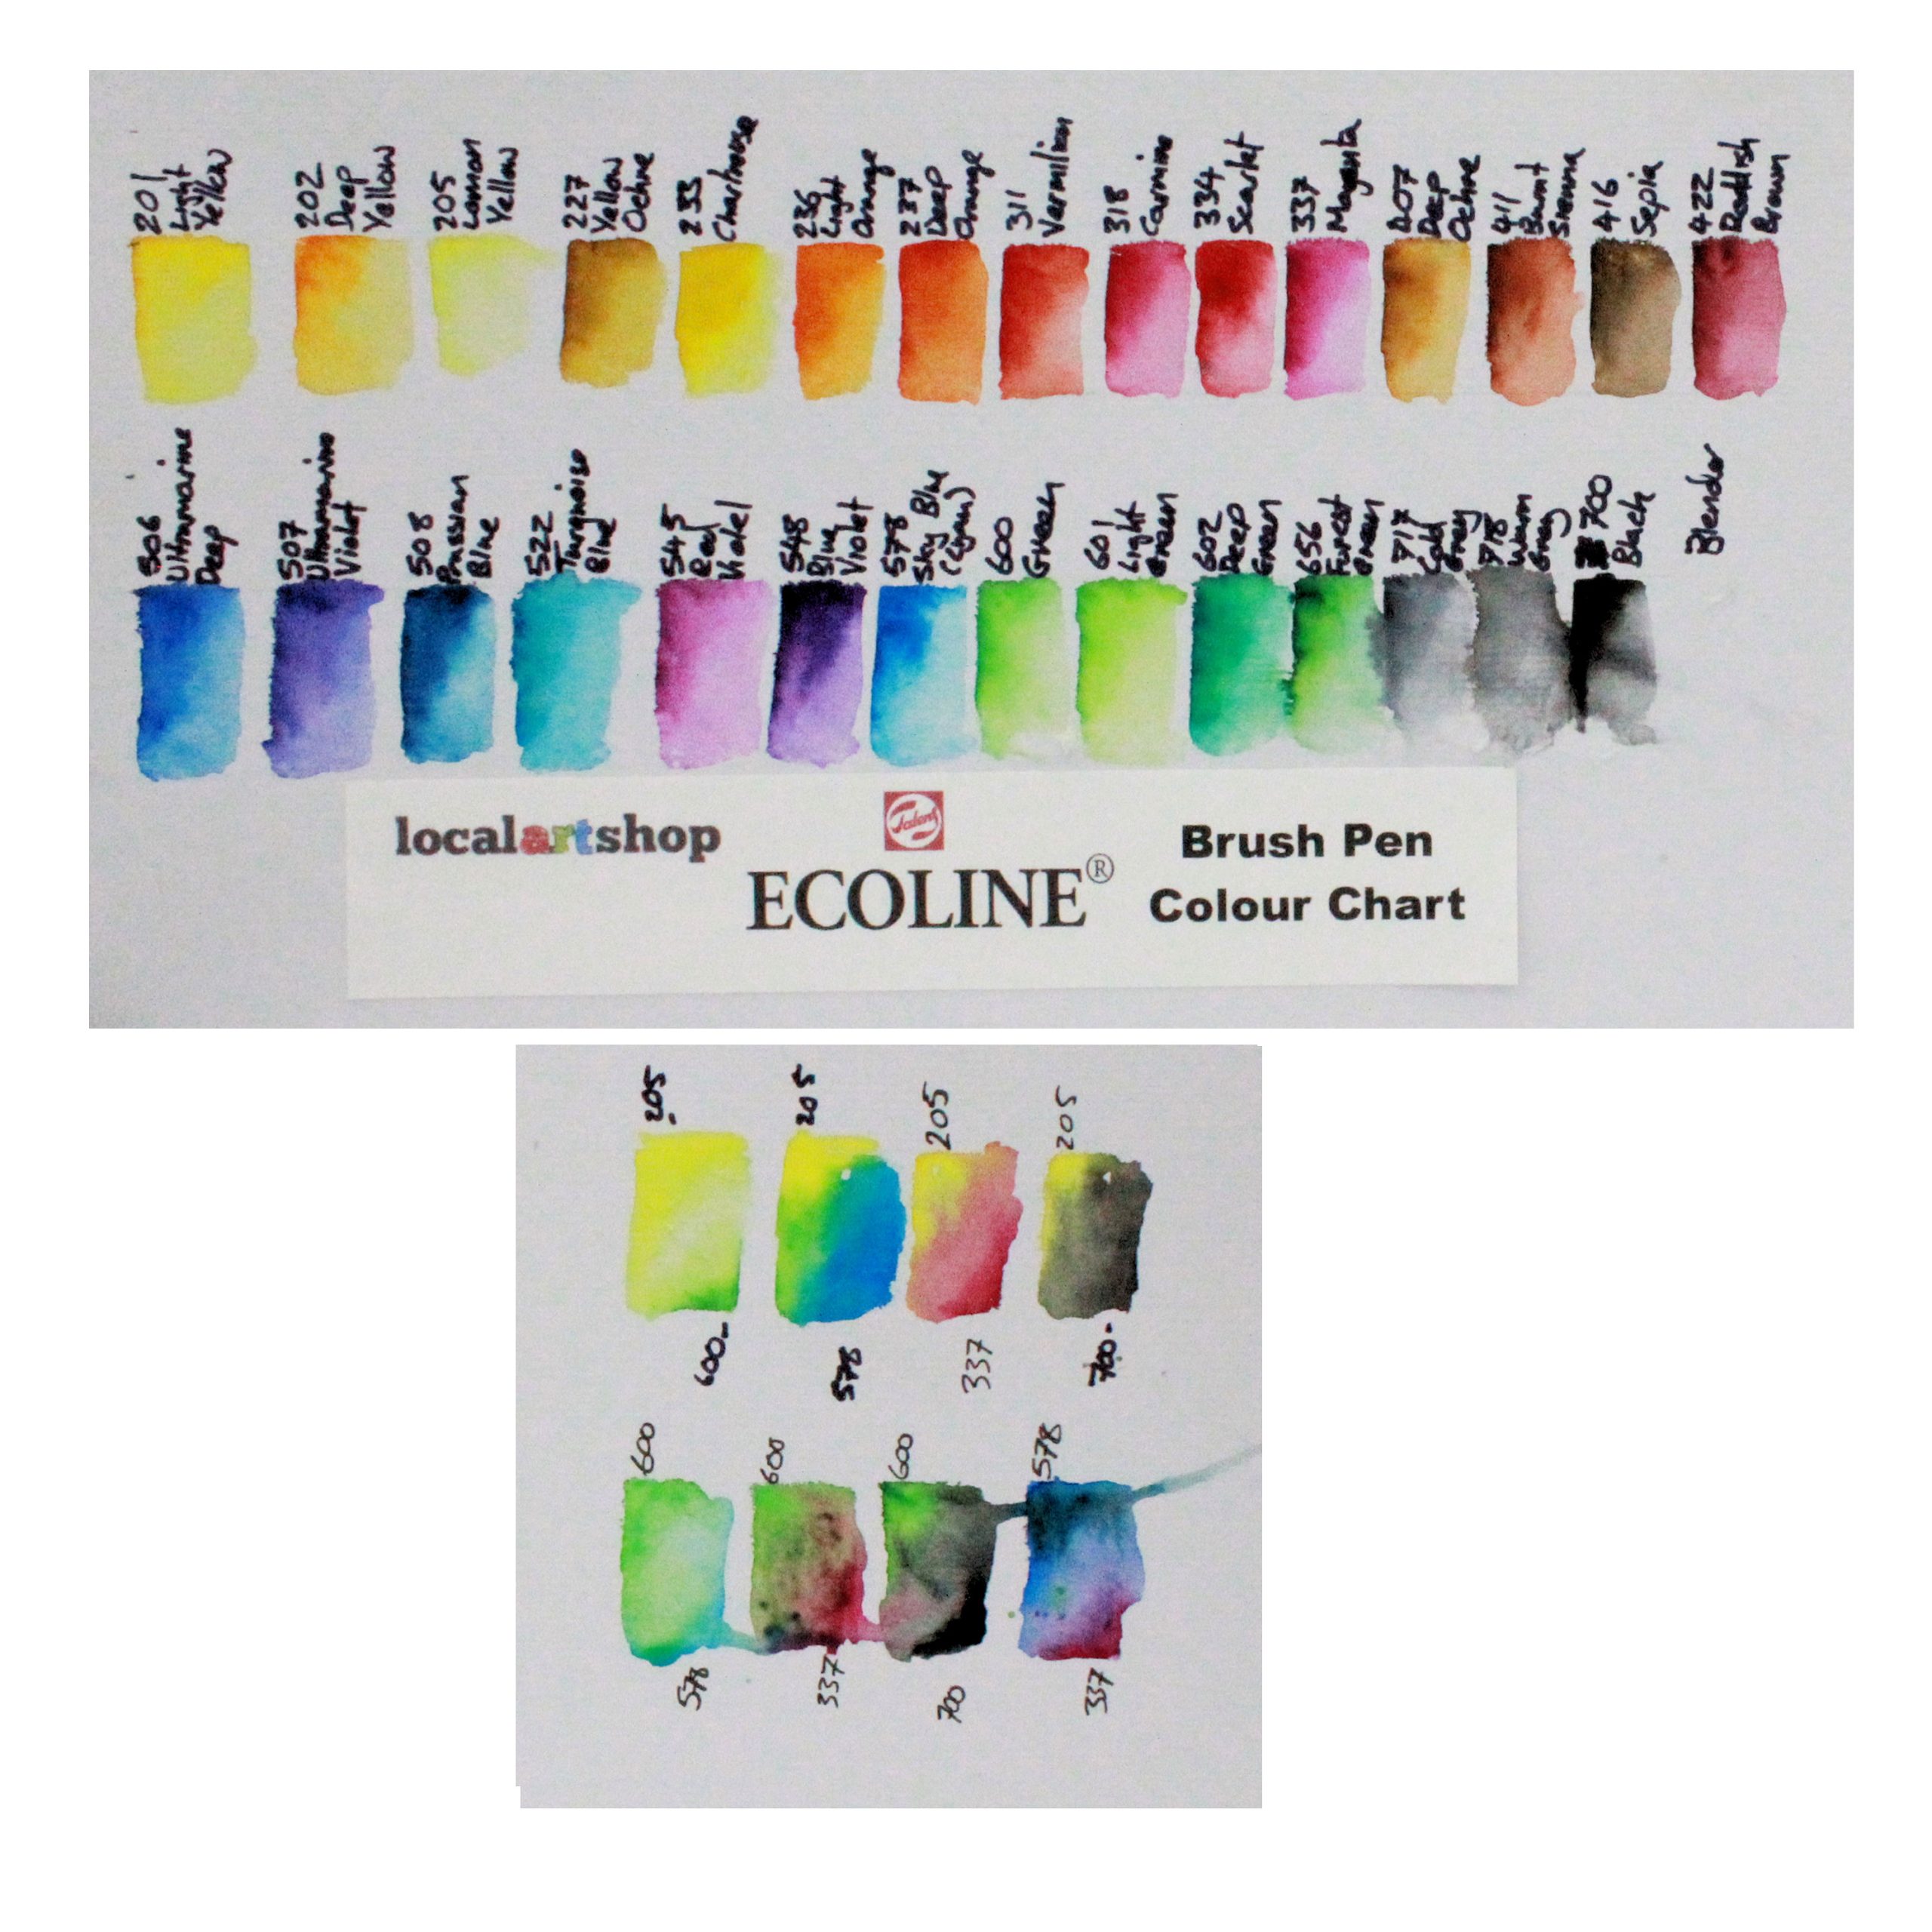 royal talens ecoline brush pens selection of color